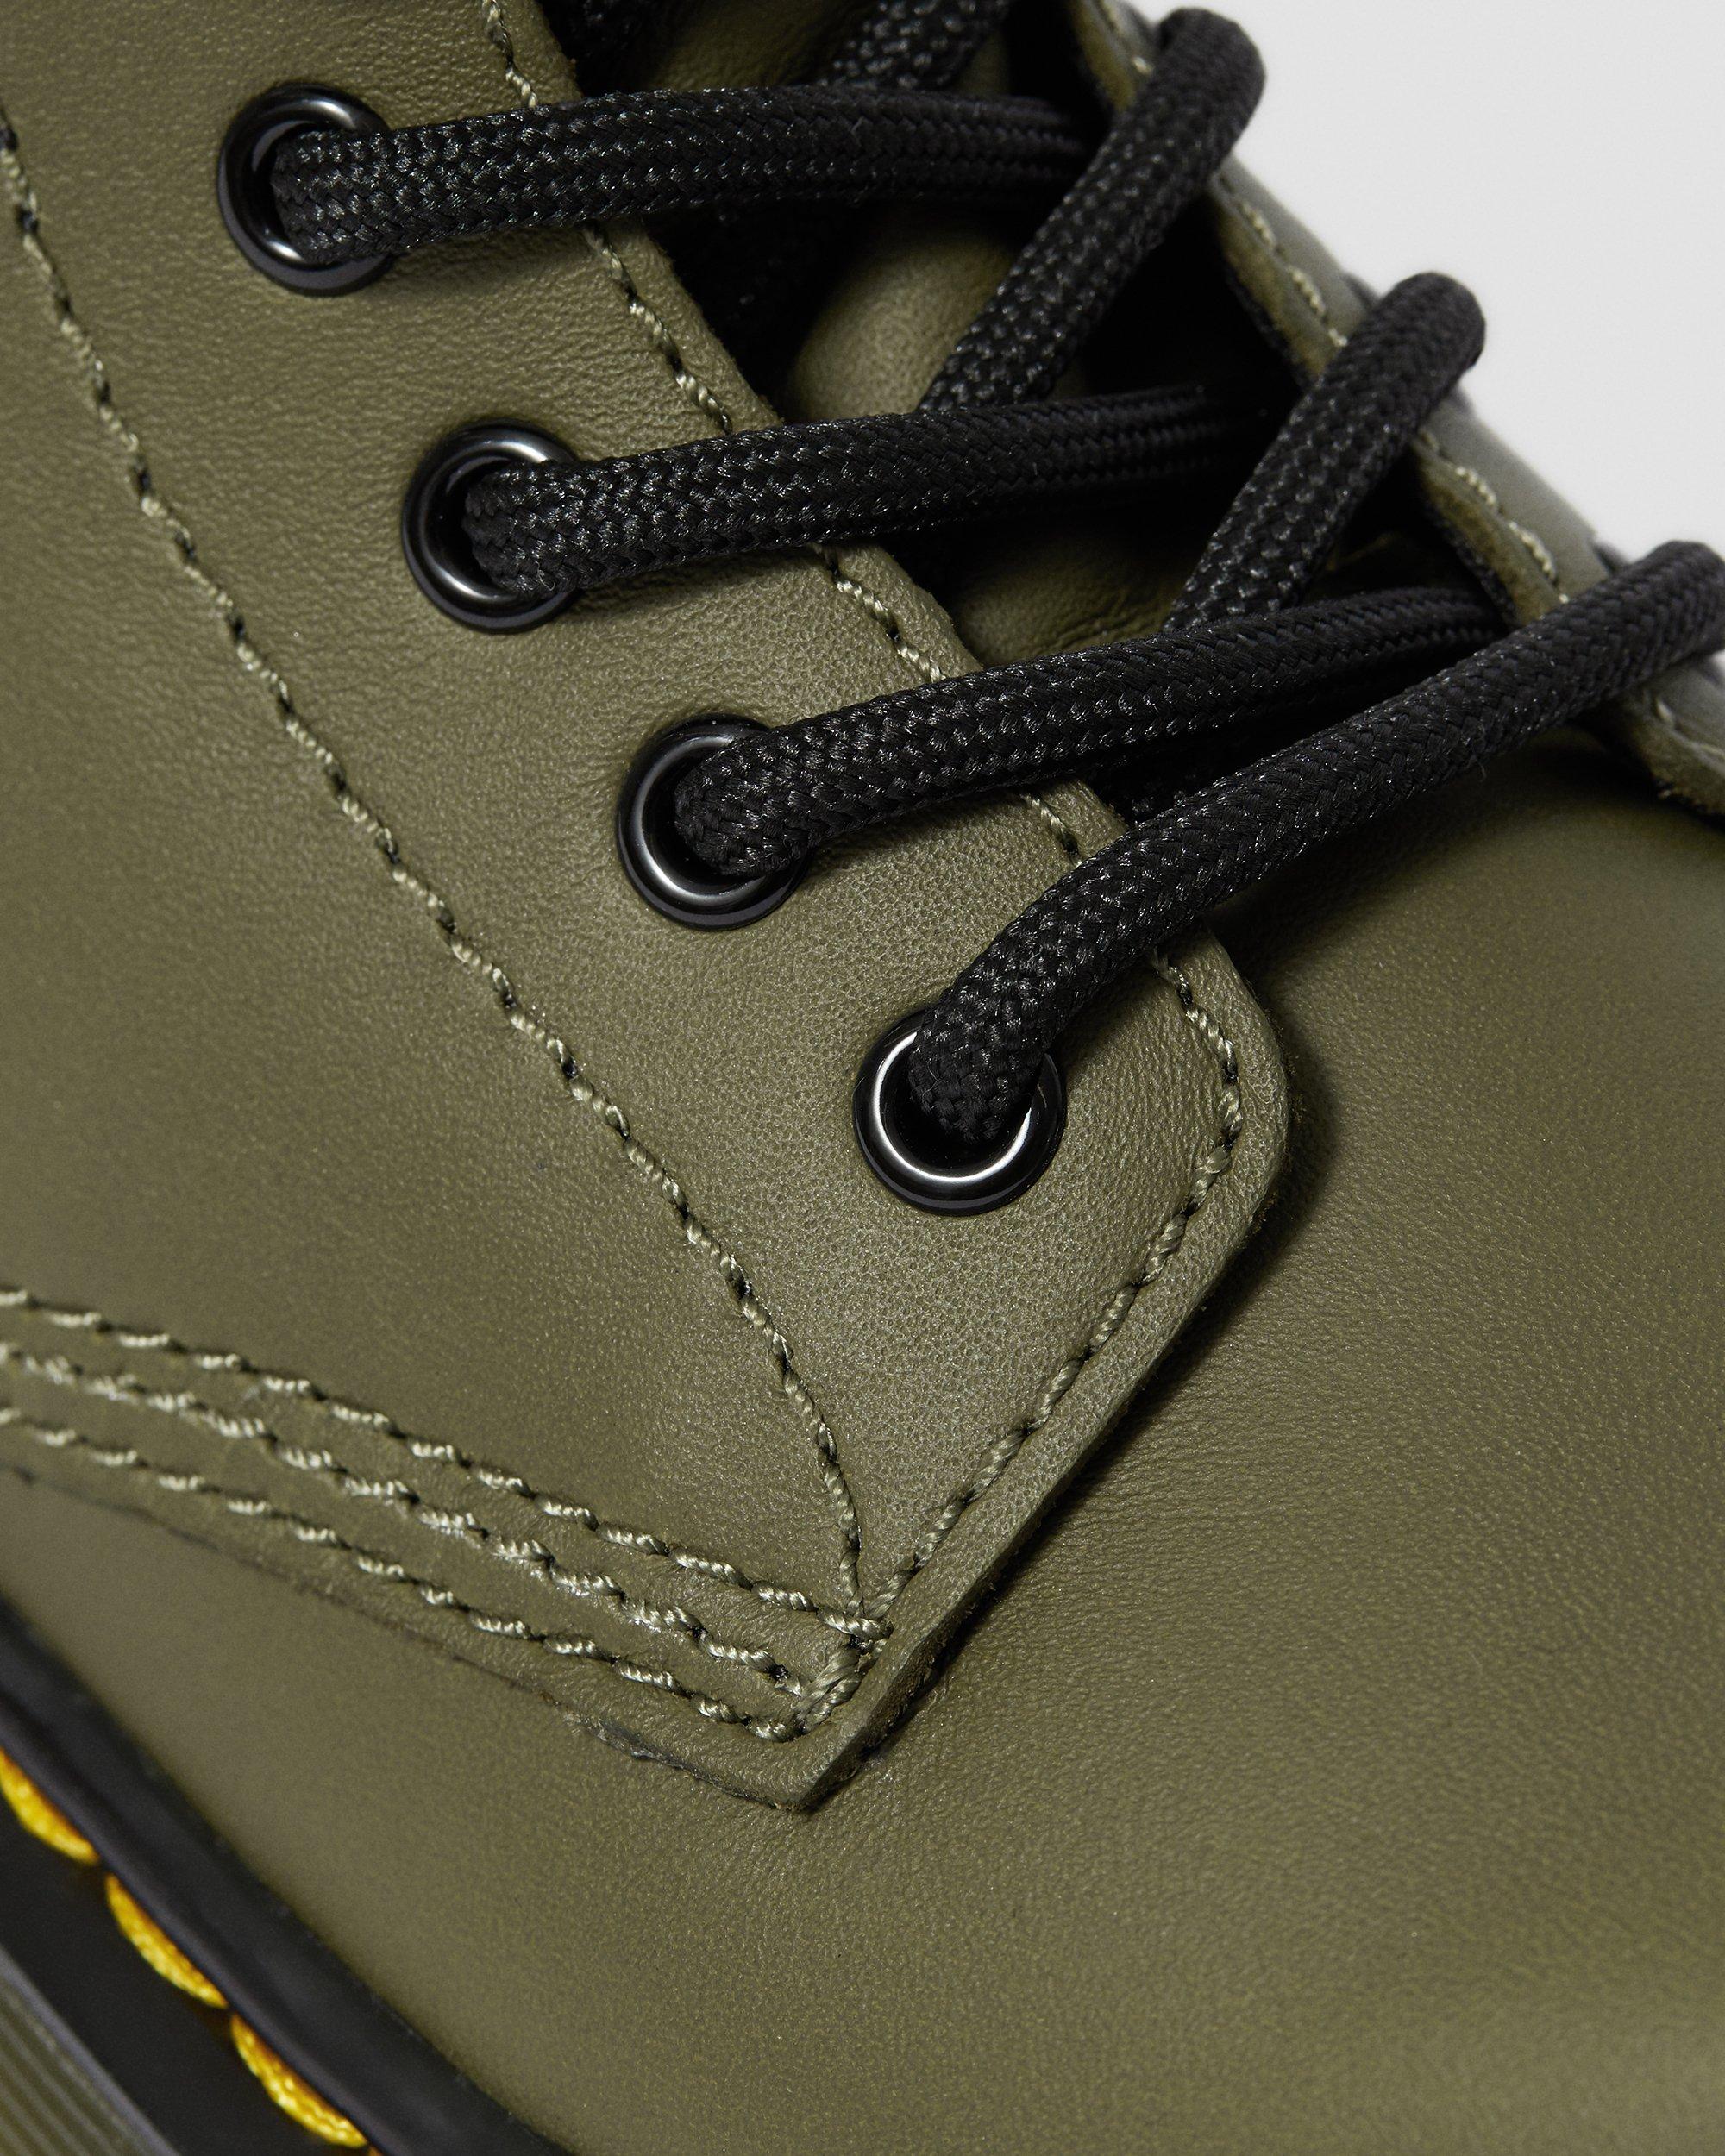 Junior 1460 Leather Lace Up Boots in Olive | Dr. Martens